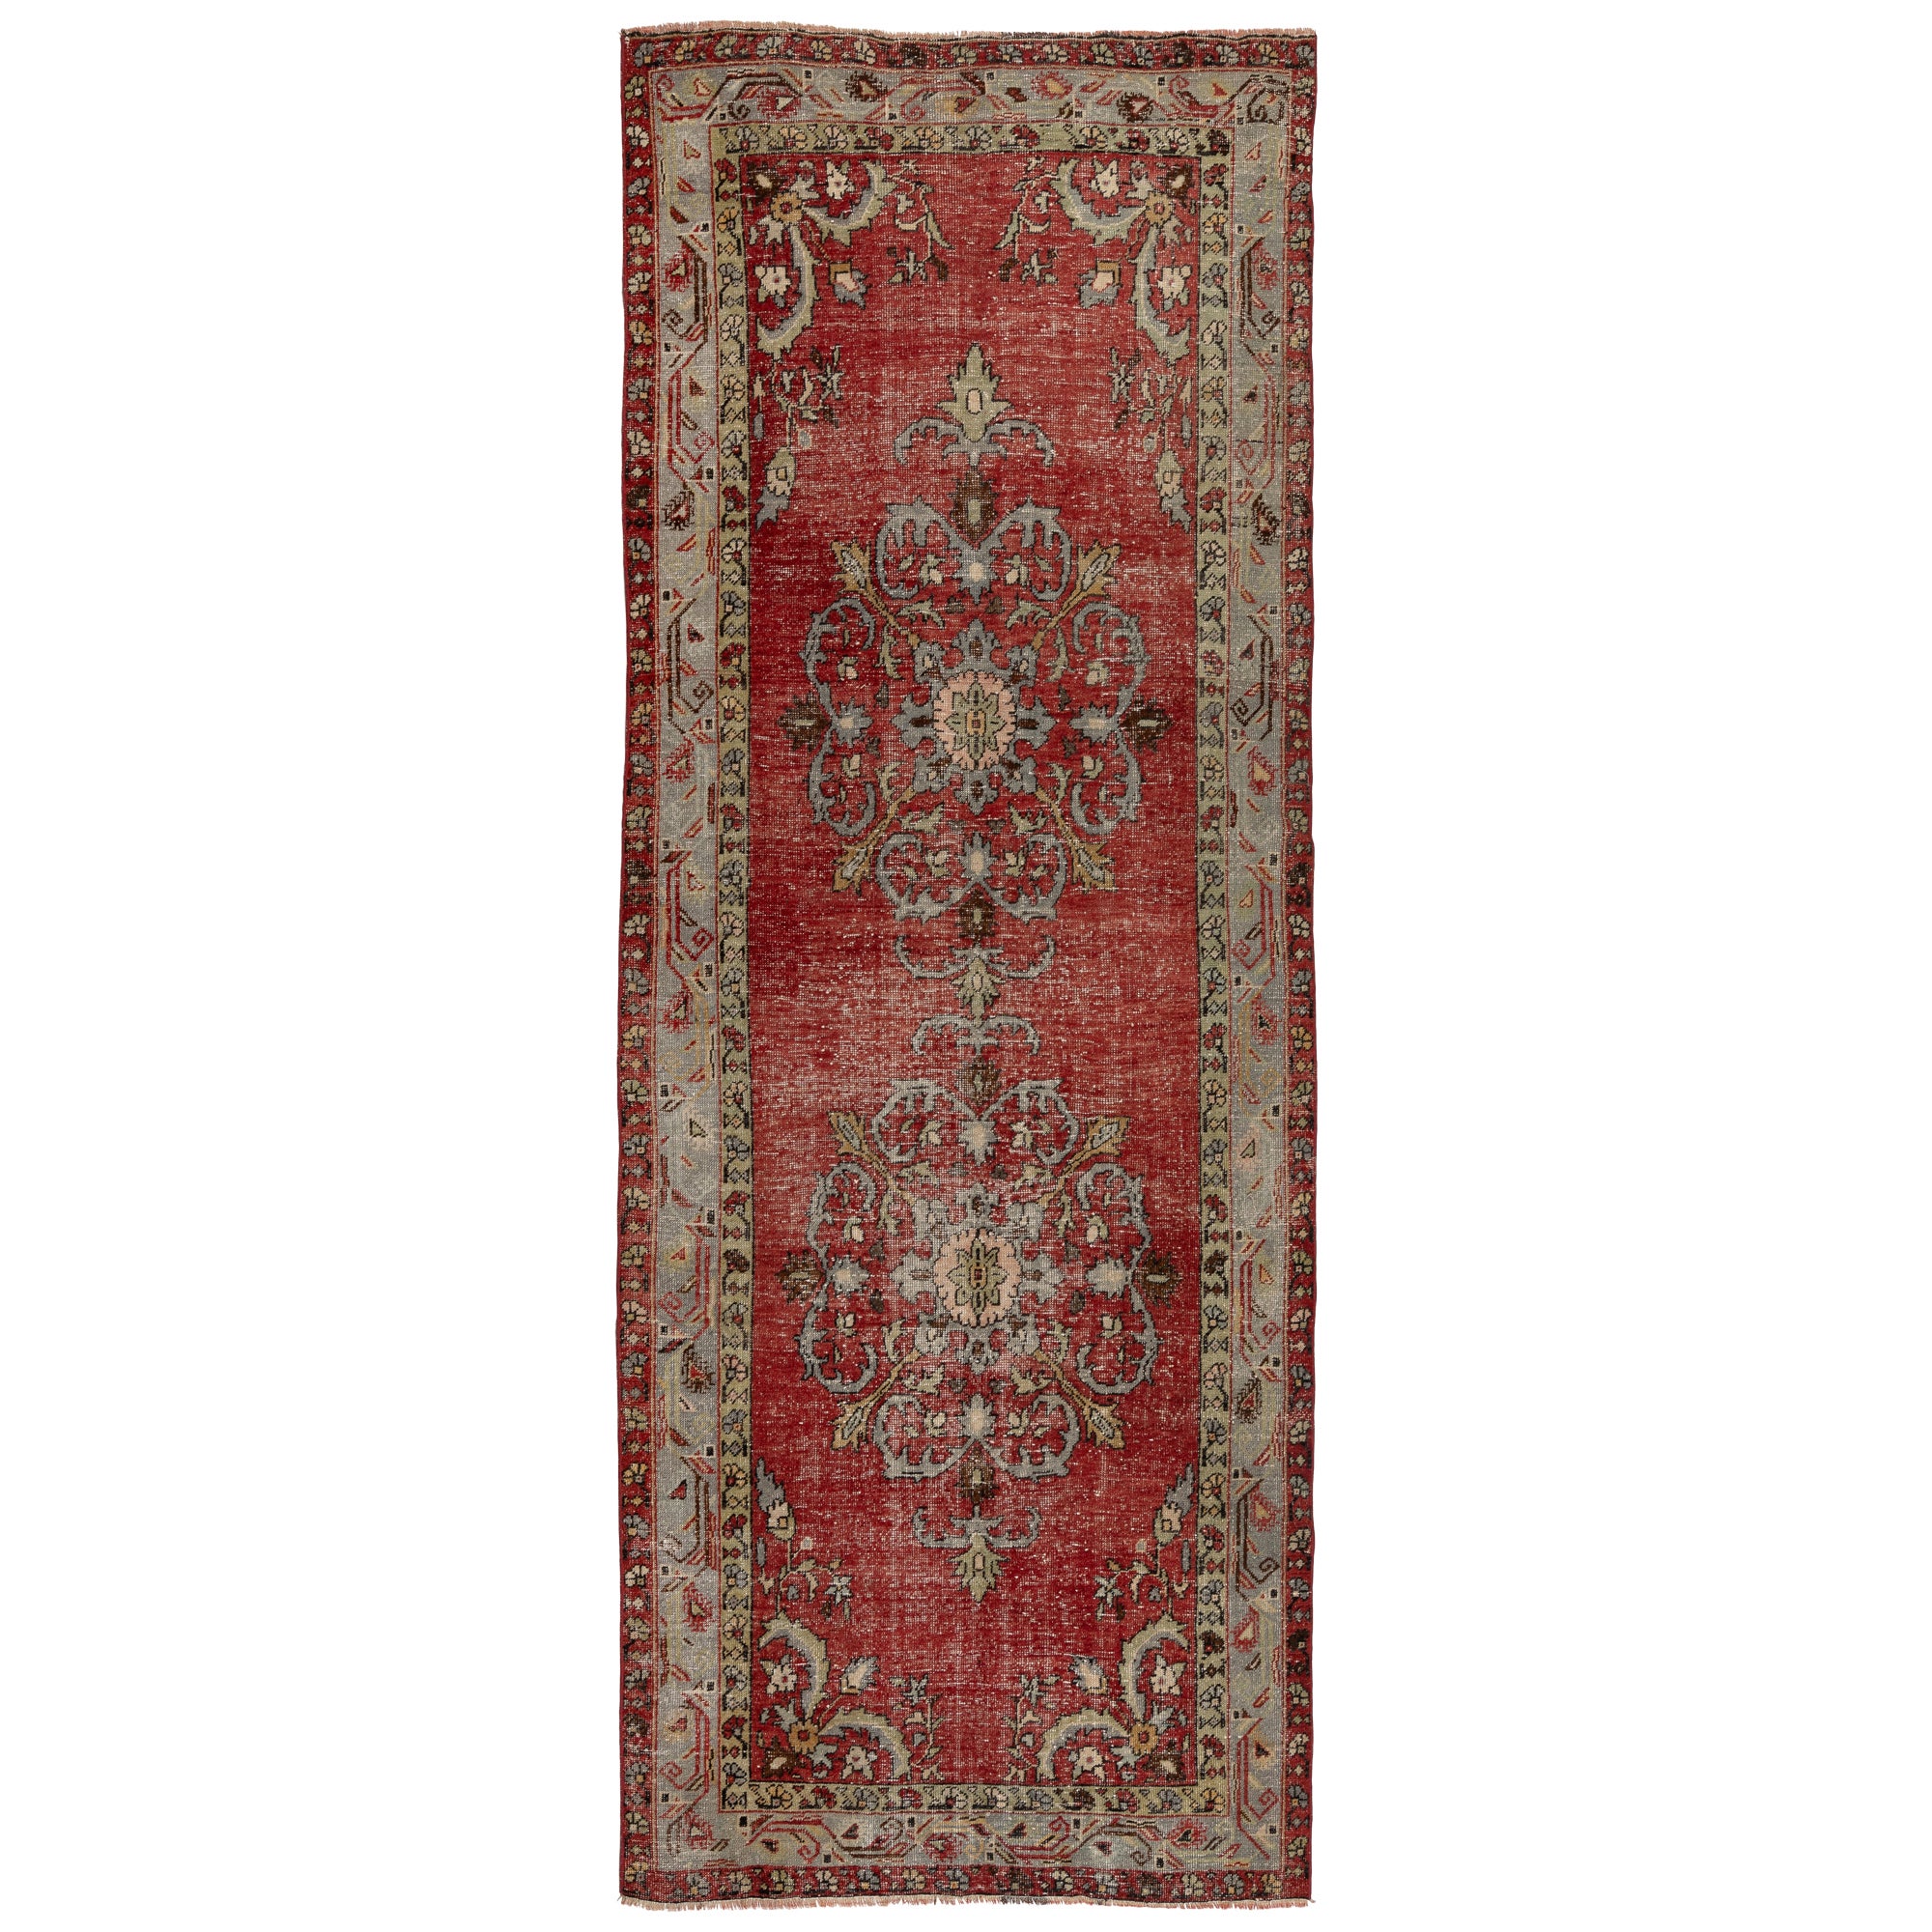 4.8x12.2 Ft Vintage Hand Knotted Anatolian Wool Runner Rug for Hallway Decor